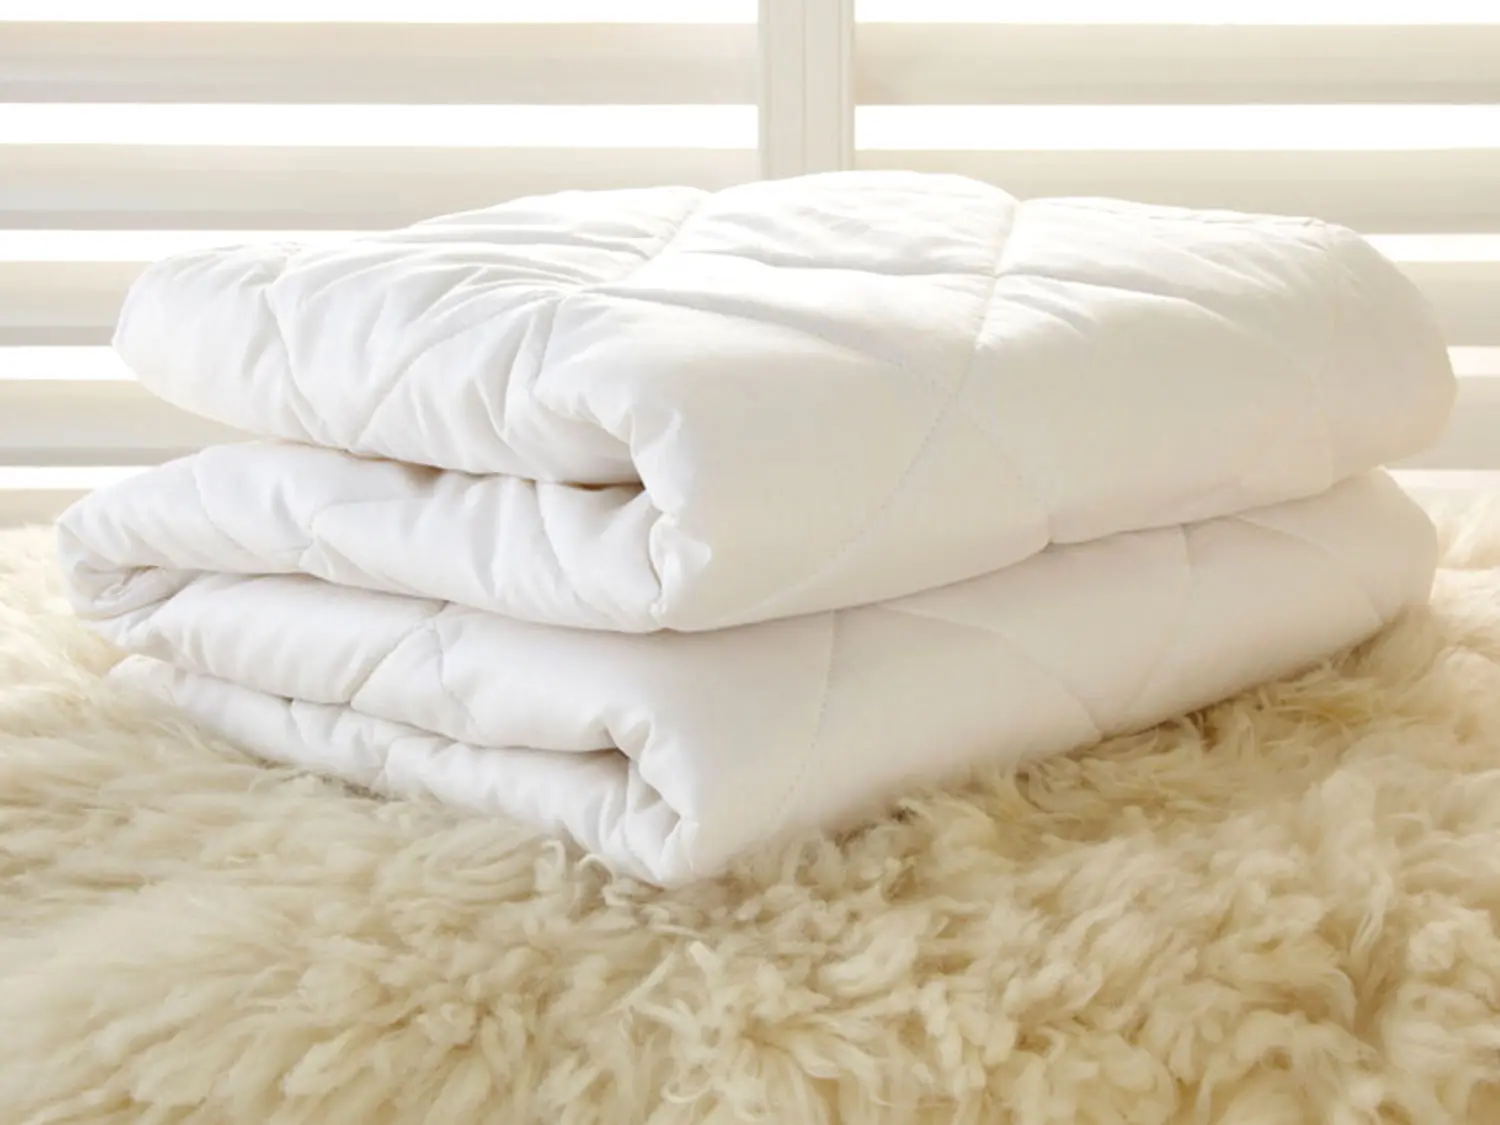 How to Always Have Soft and Fluffy Towels - Snug & Cozy Life